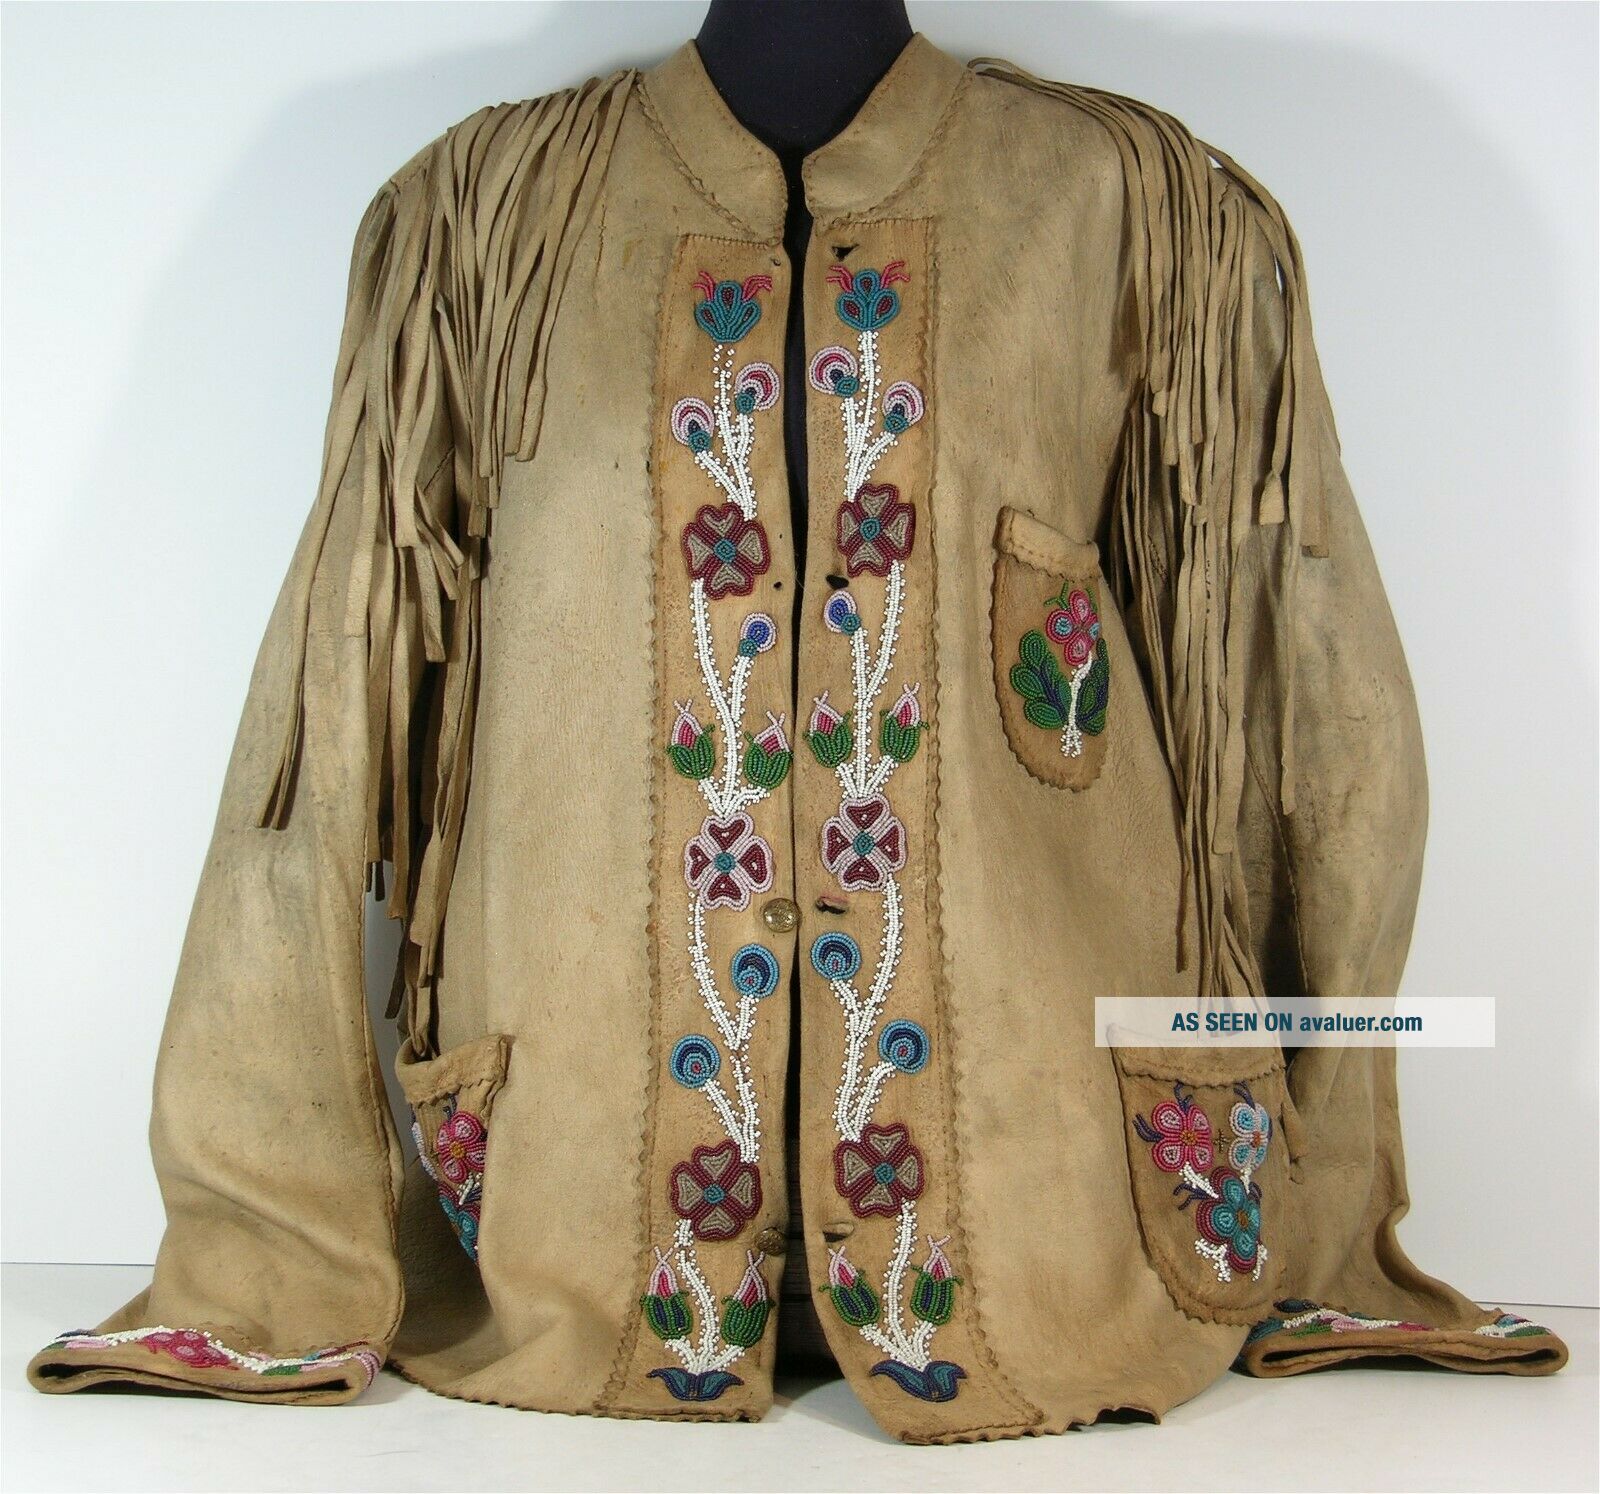 1890s NATIVE AMERICAN PLAINS CREE INDIAN BEAD DECORATED HIDE JACKET ...